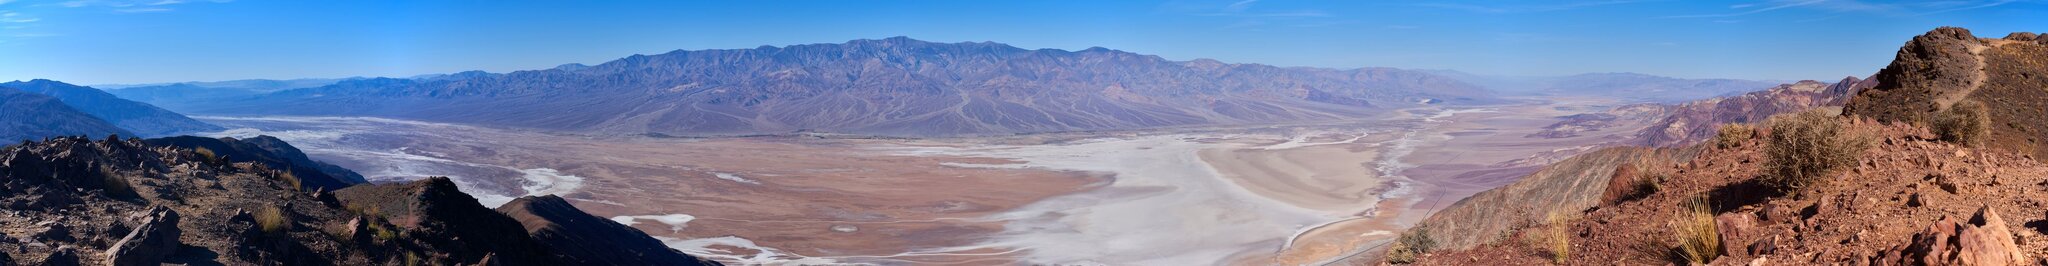 Dantes View - Death Valley - 10202019 - 01s small.jpg